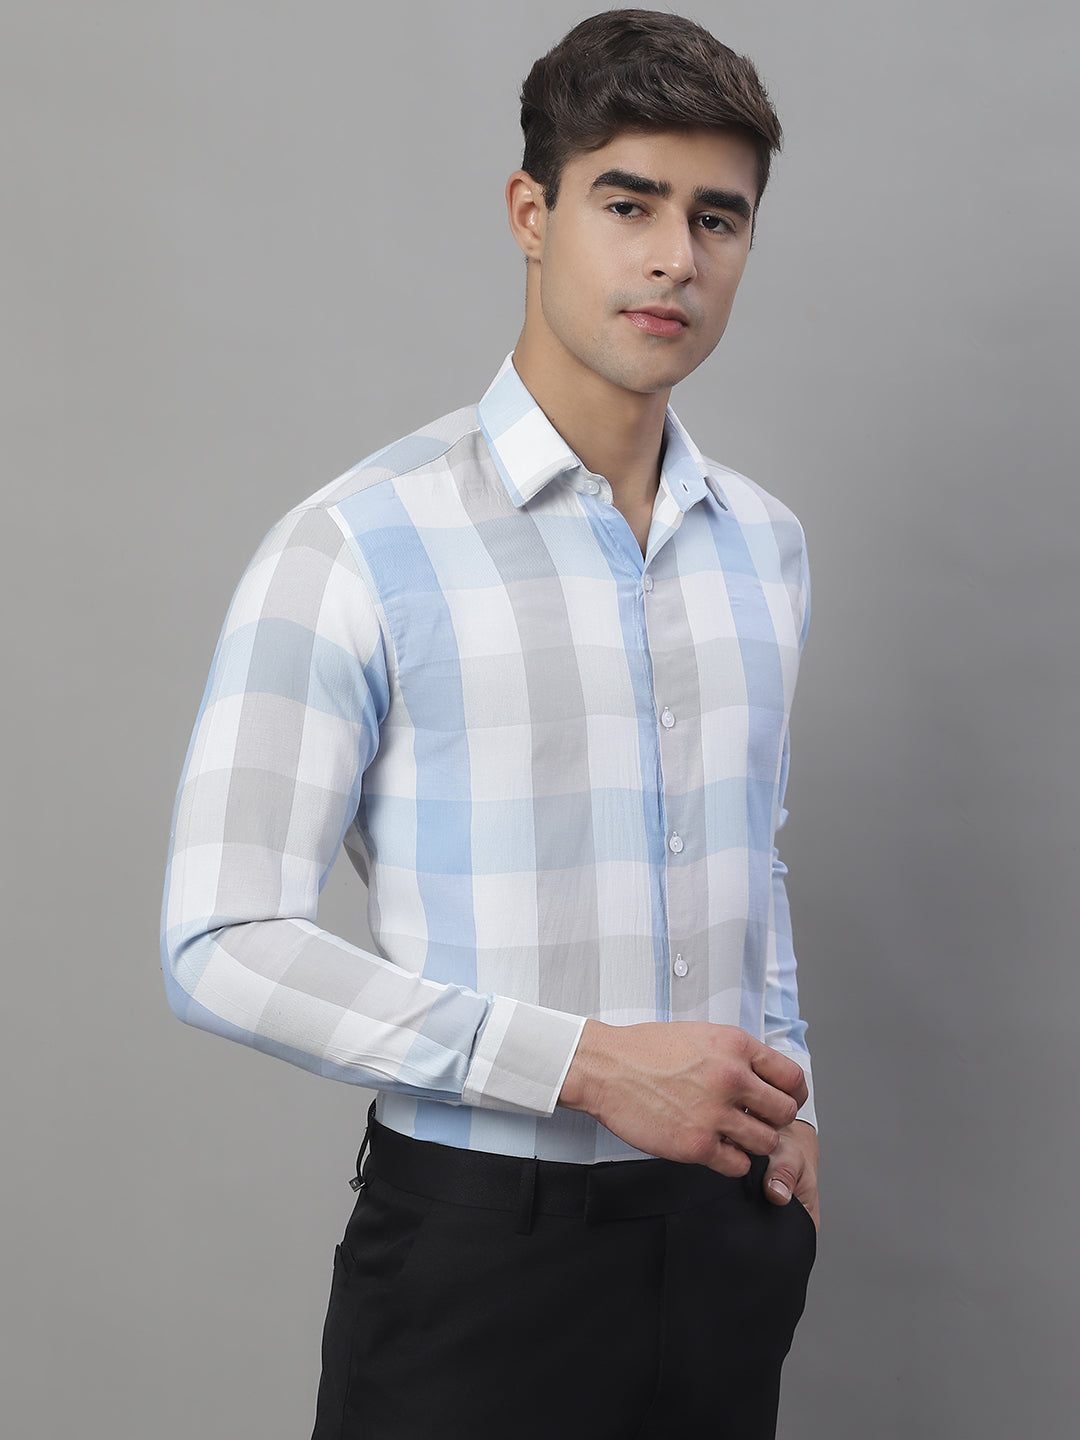 Men's Pure Cotton Checked Formal Shirts